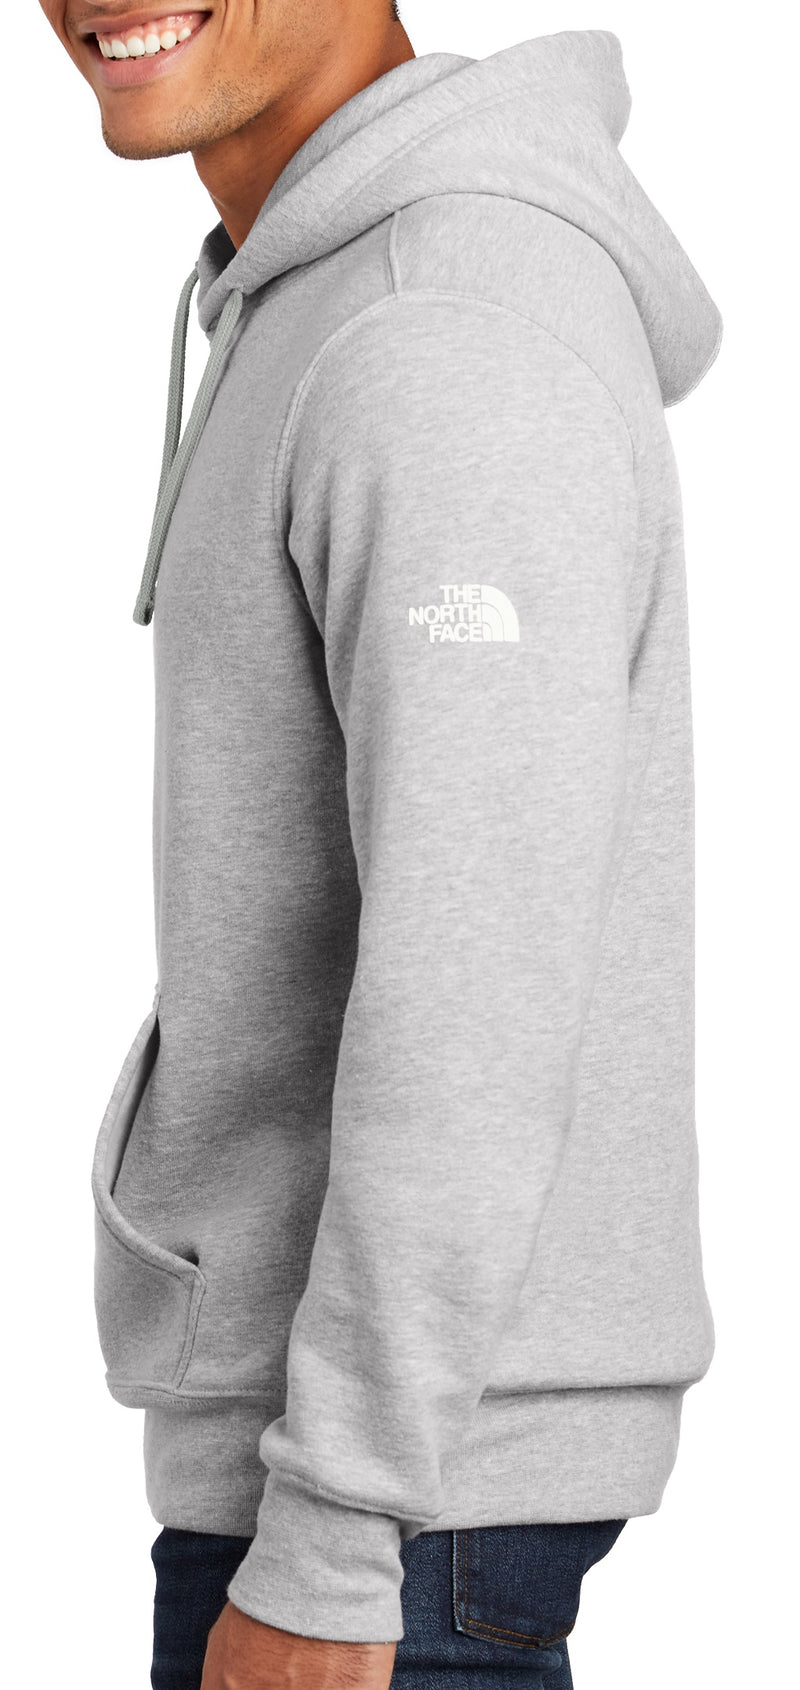 The North Face [NF0A47FF] Pullover Hoodie. Live Chat For Bulk Discount